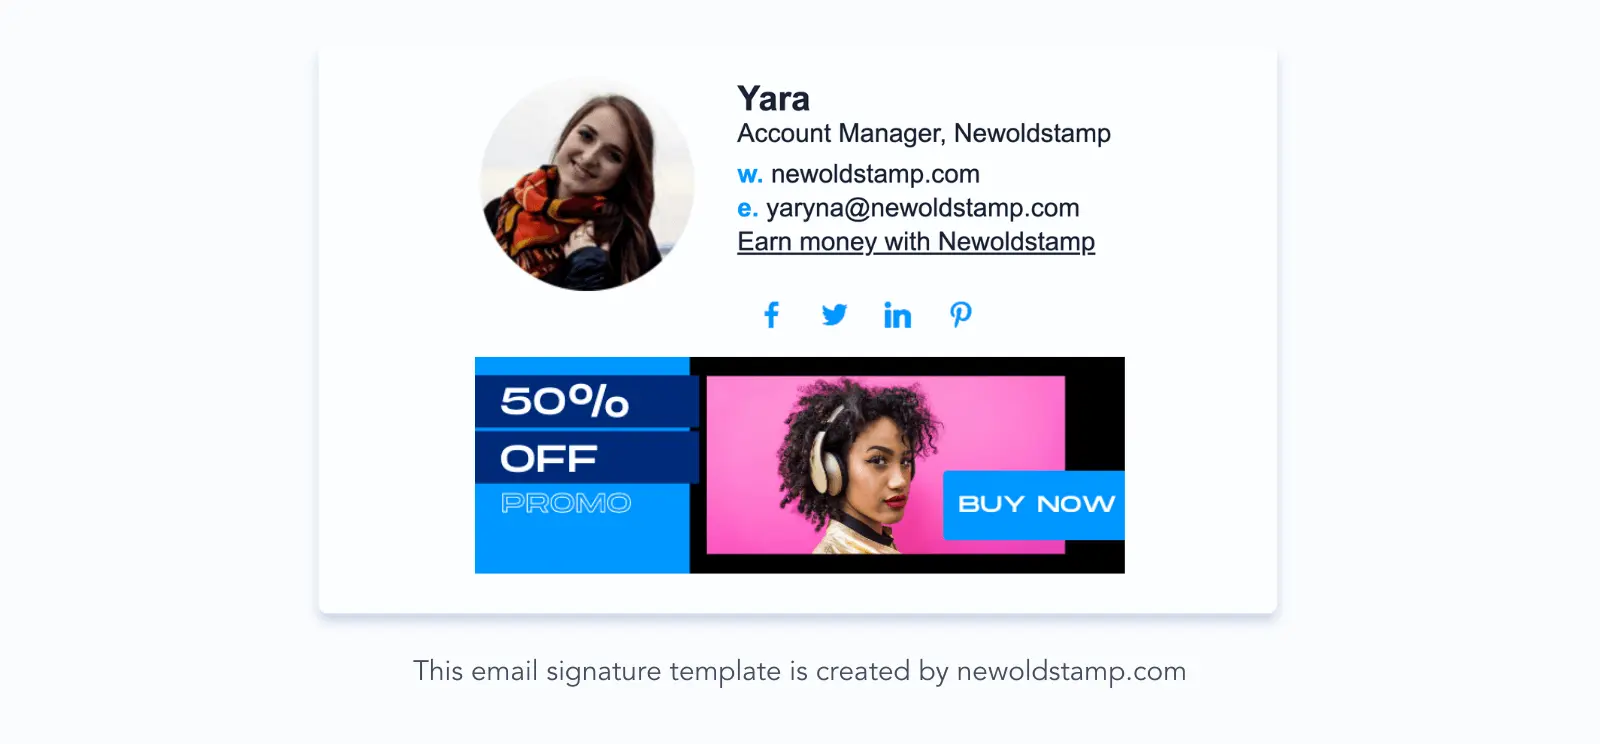 Email signature banner to increase sales